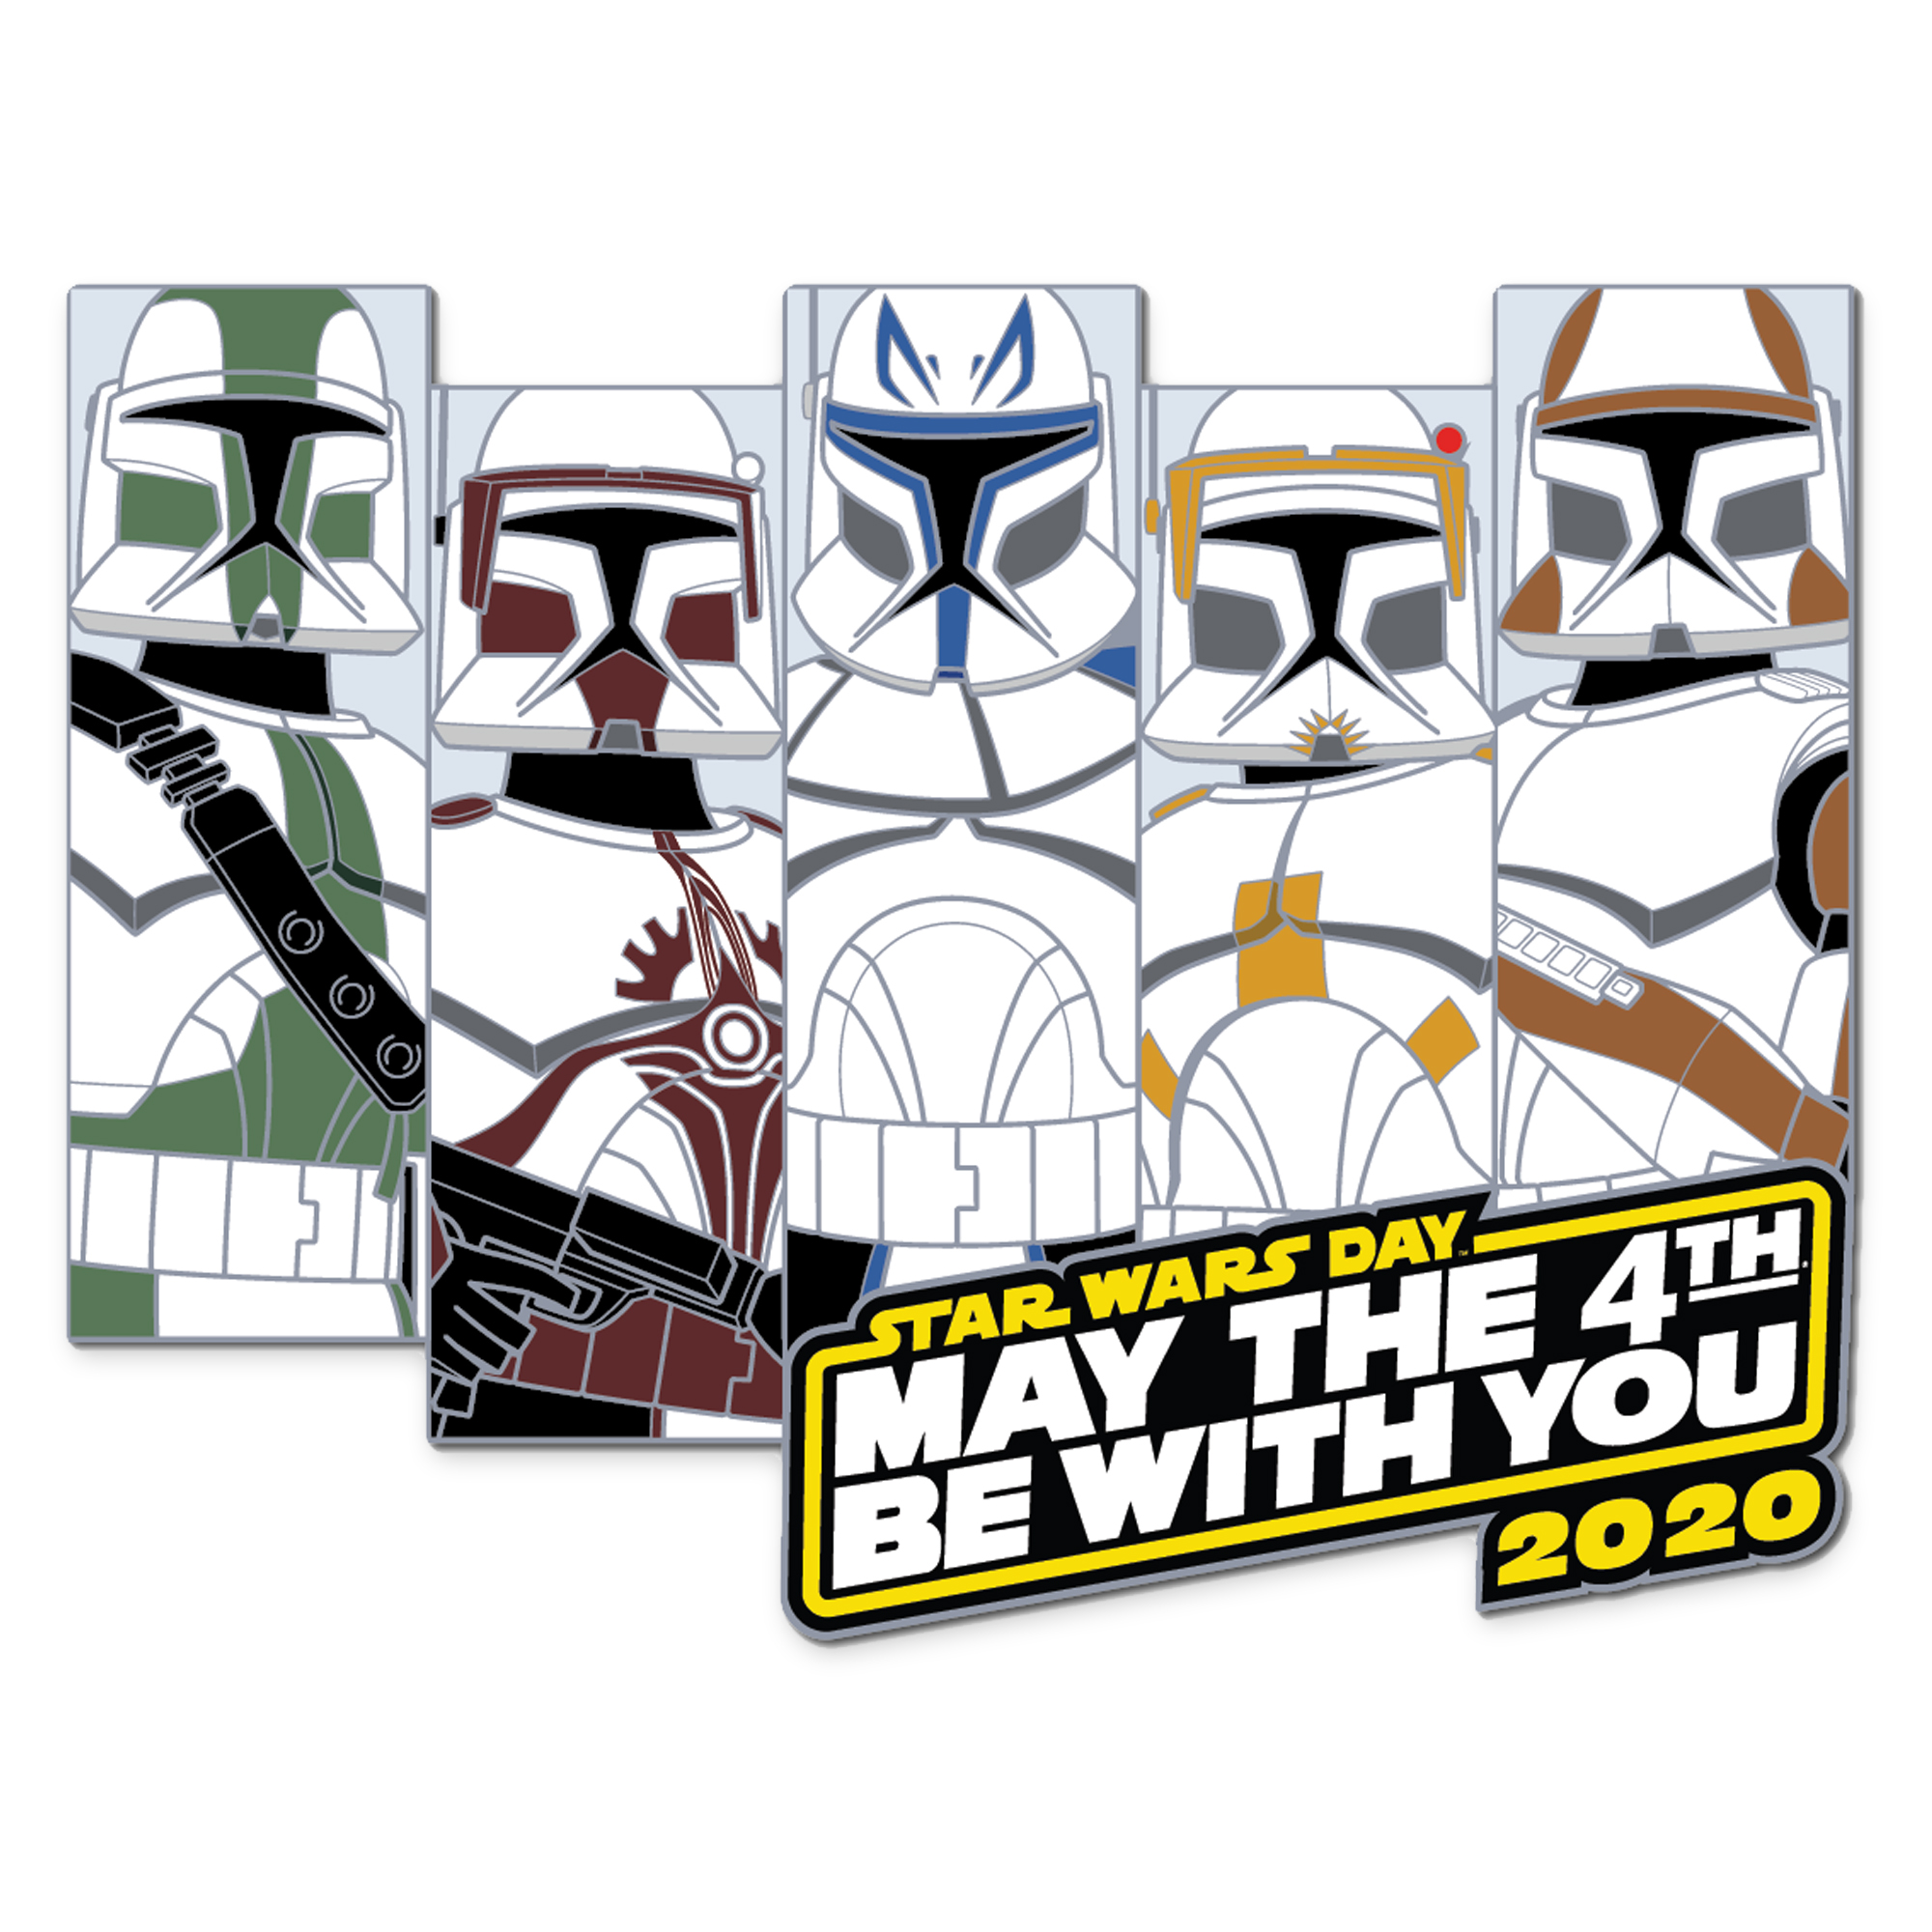 Exciting May The Fourth Merchandise shopDisney Exclusives